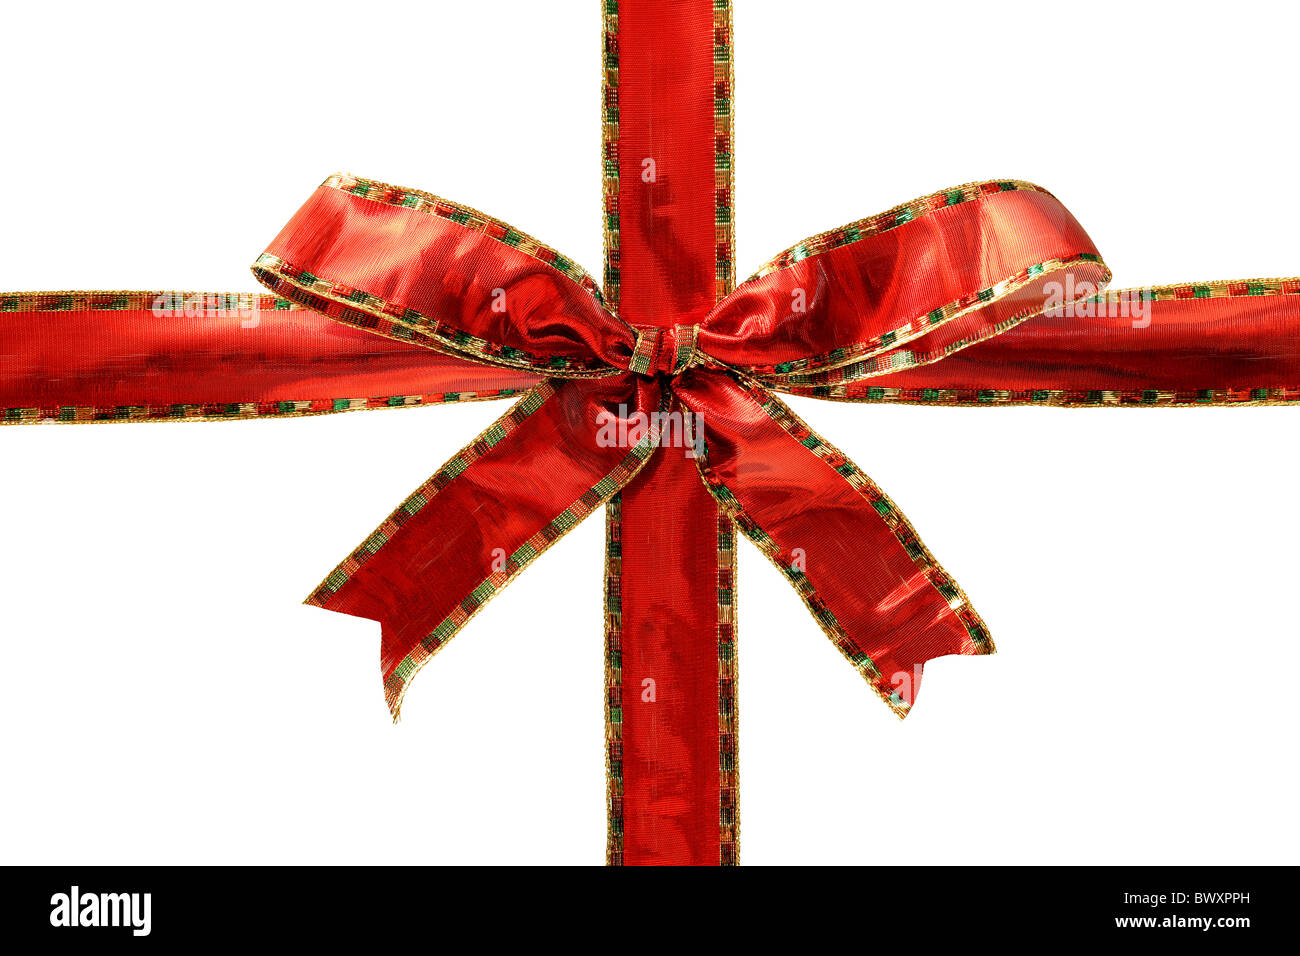 Gold gift bow stock photo. Image of pattern, shiny, package - 17169450